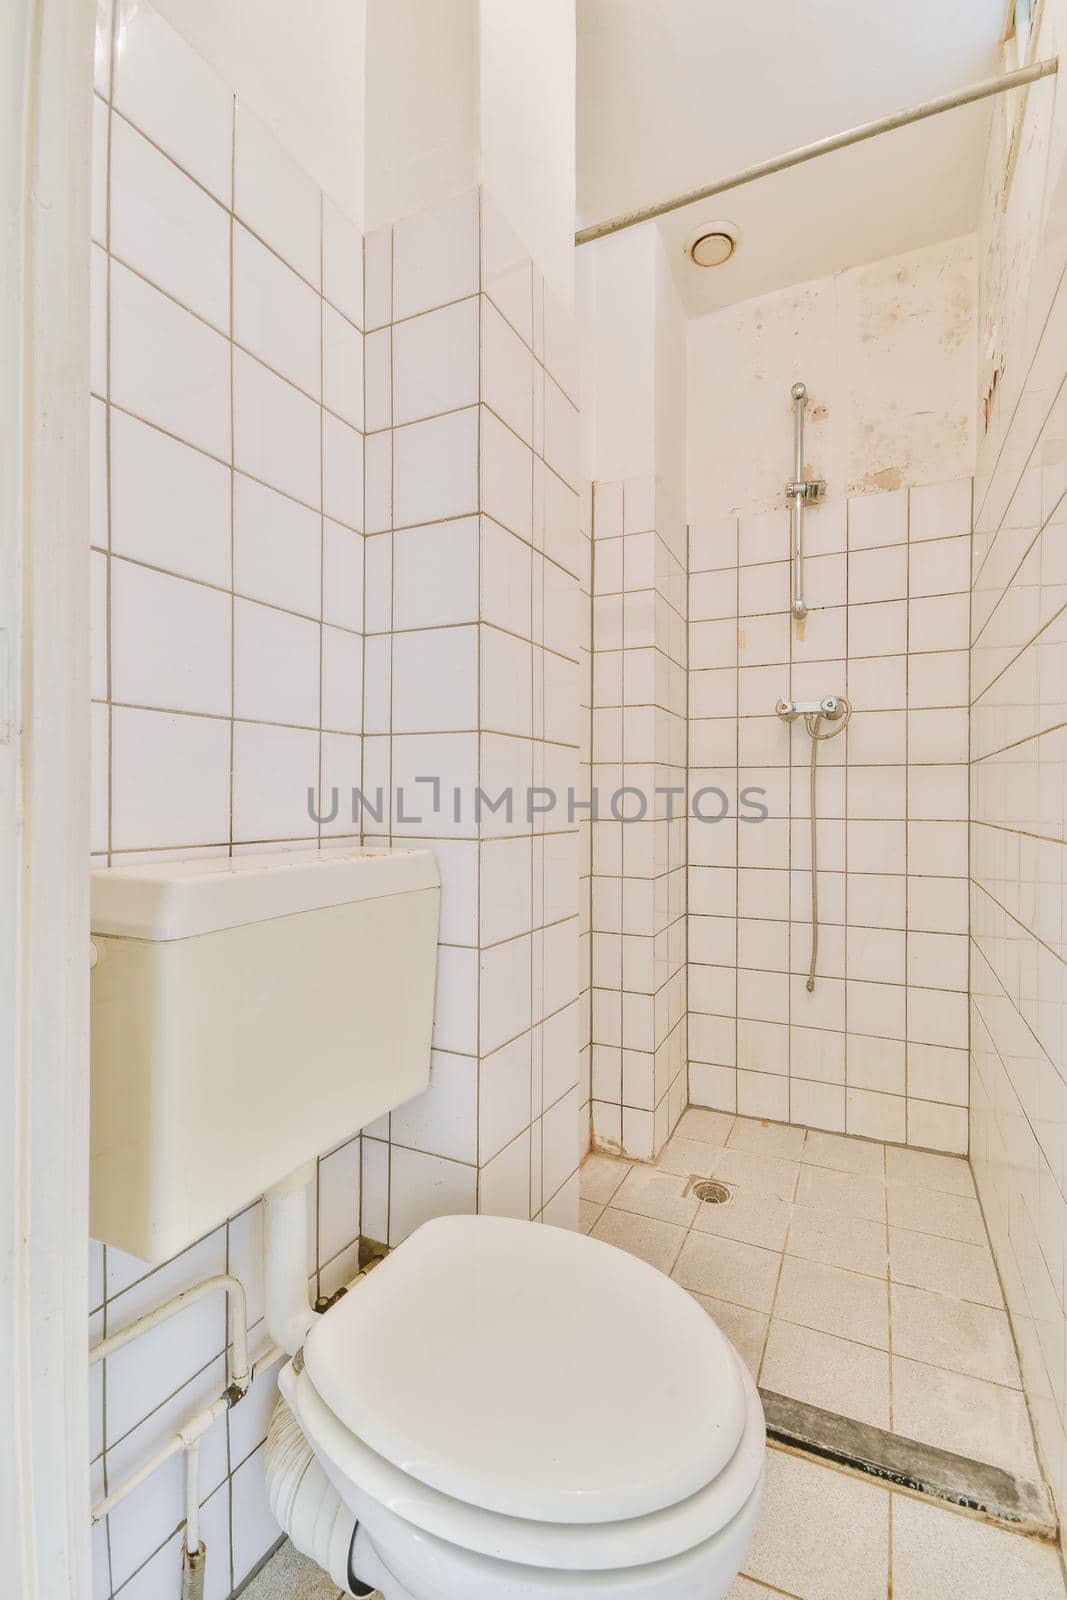 Toilet and shower in bathroom by casamedia